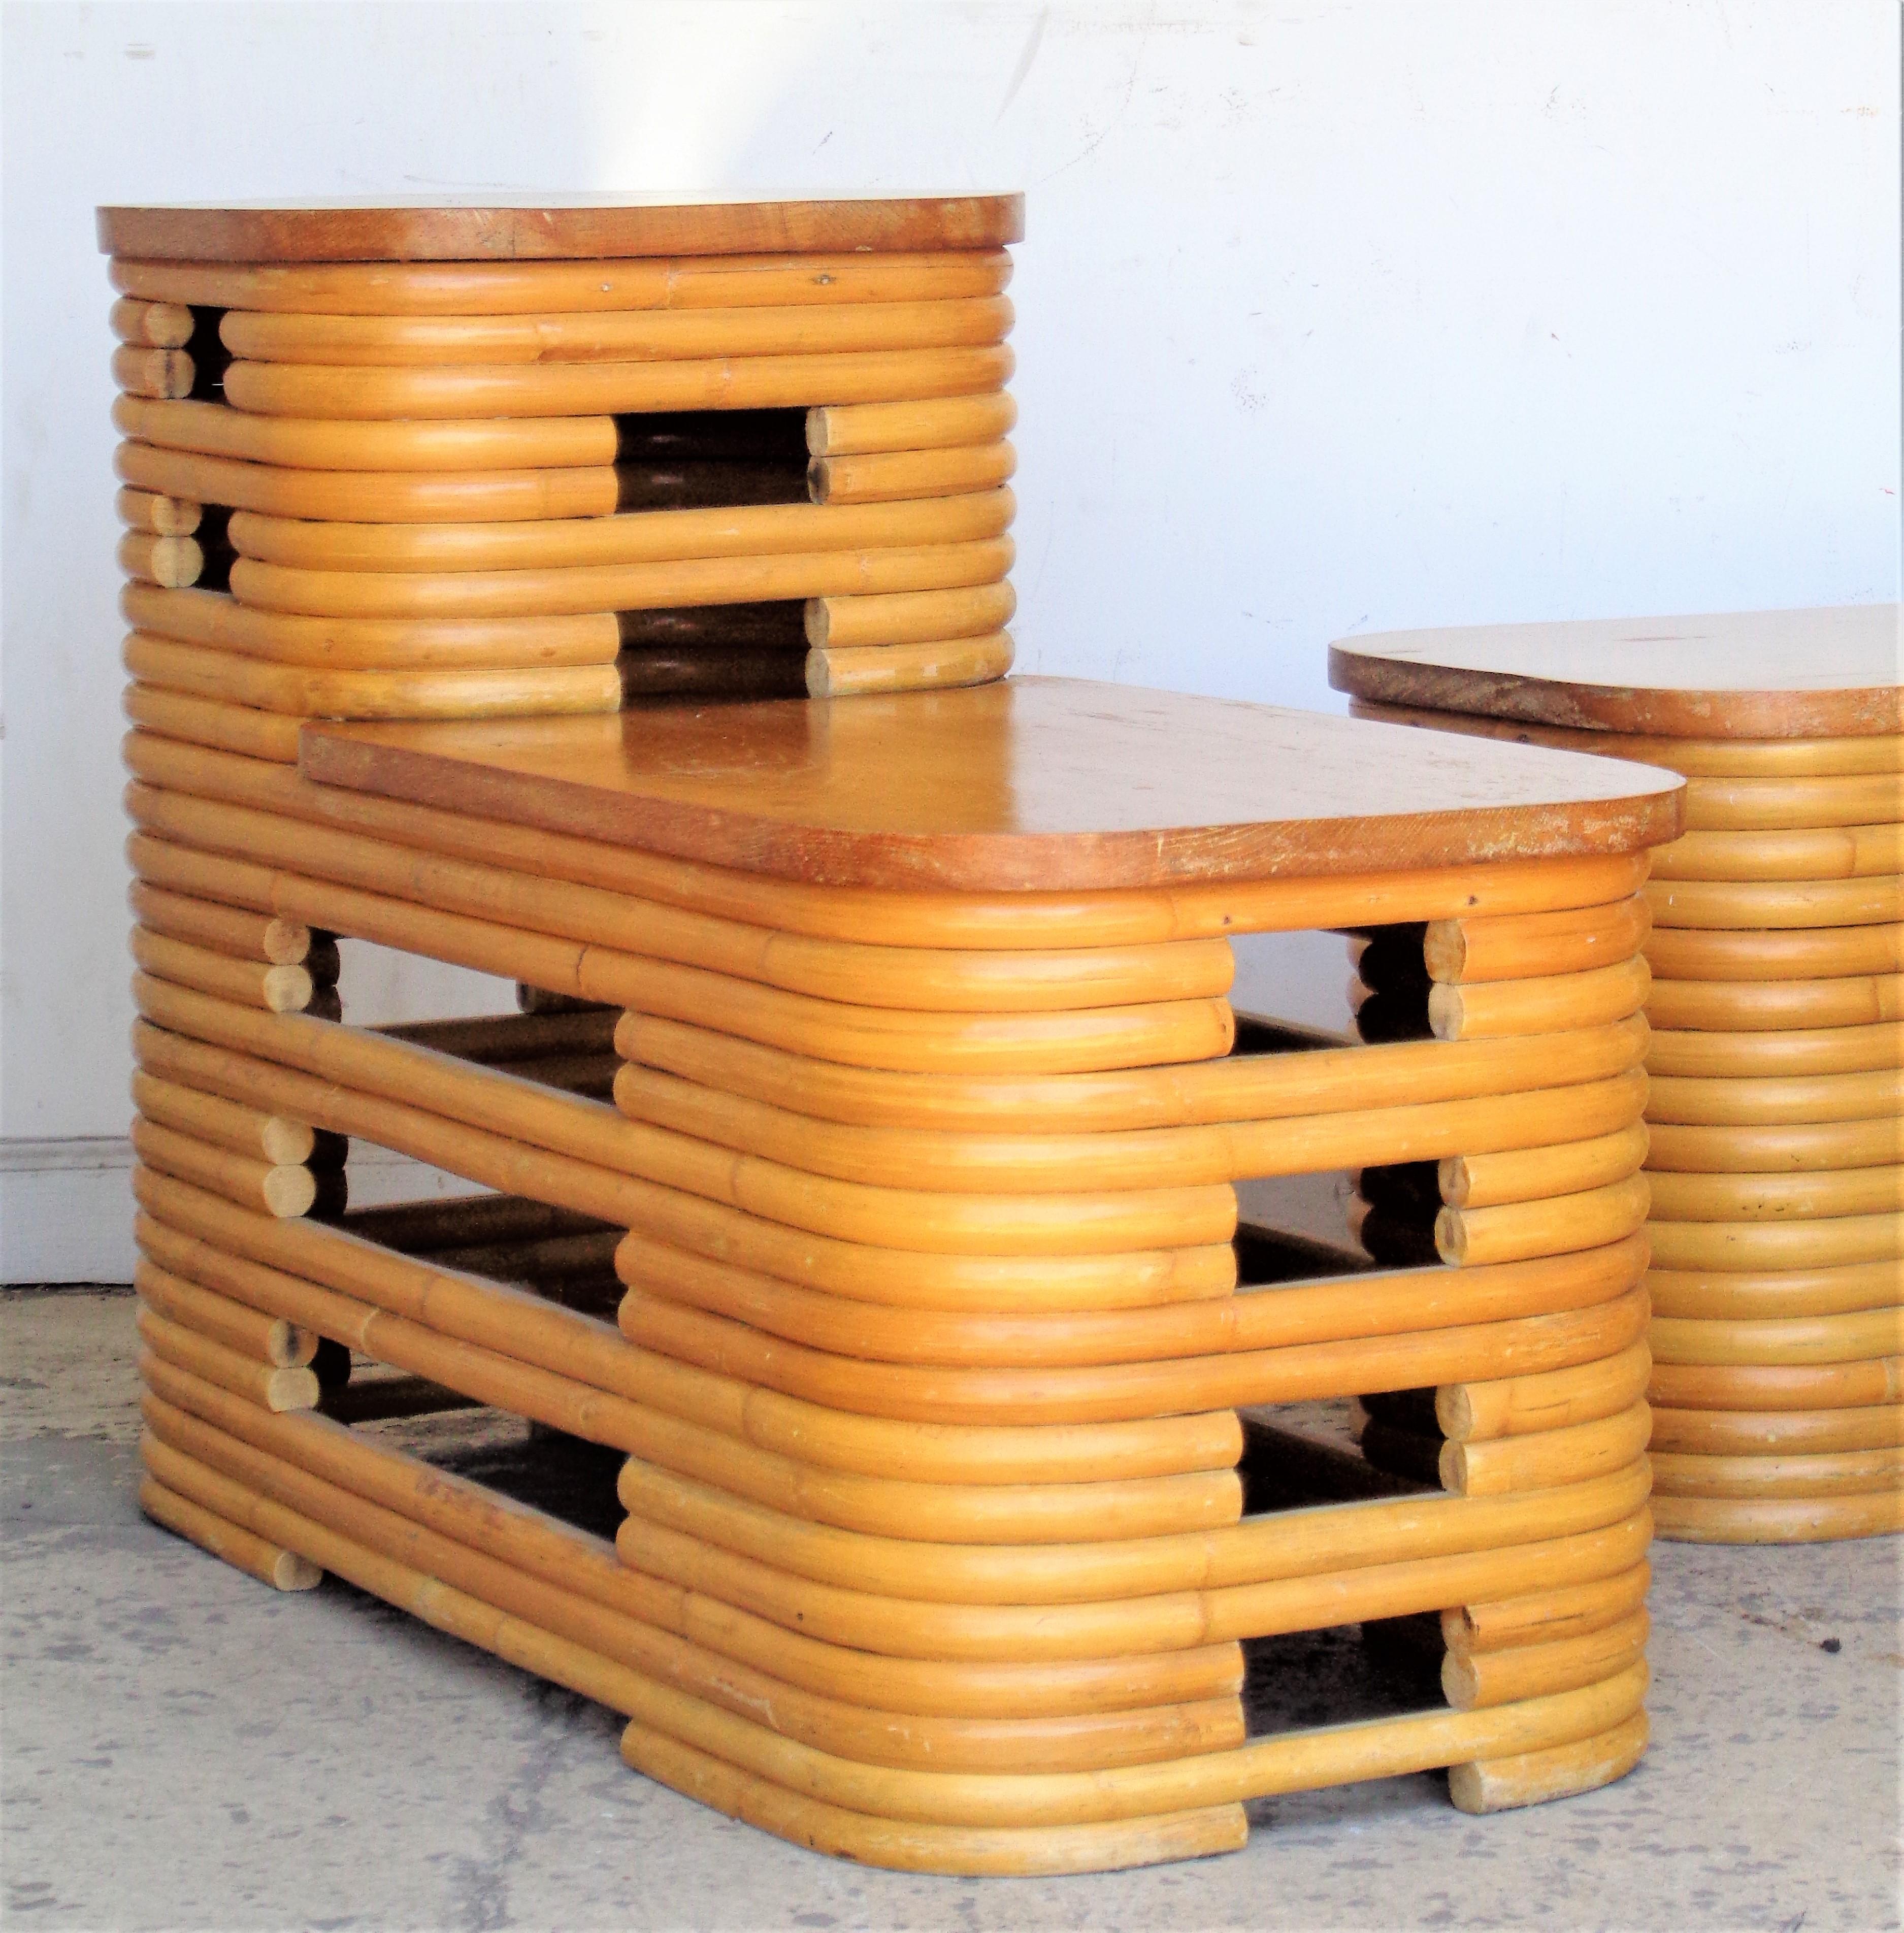 Matched pair of classic Art Deco style bent and stacked rattan two tier side / end tables with oak tops in overall great original vintage condition. Both tables with beautifully aged glowing honey colored surface. Paul Frankl design, made in Japan.